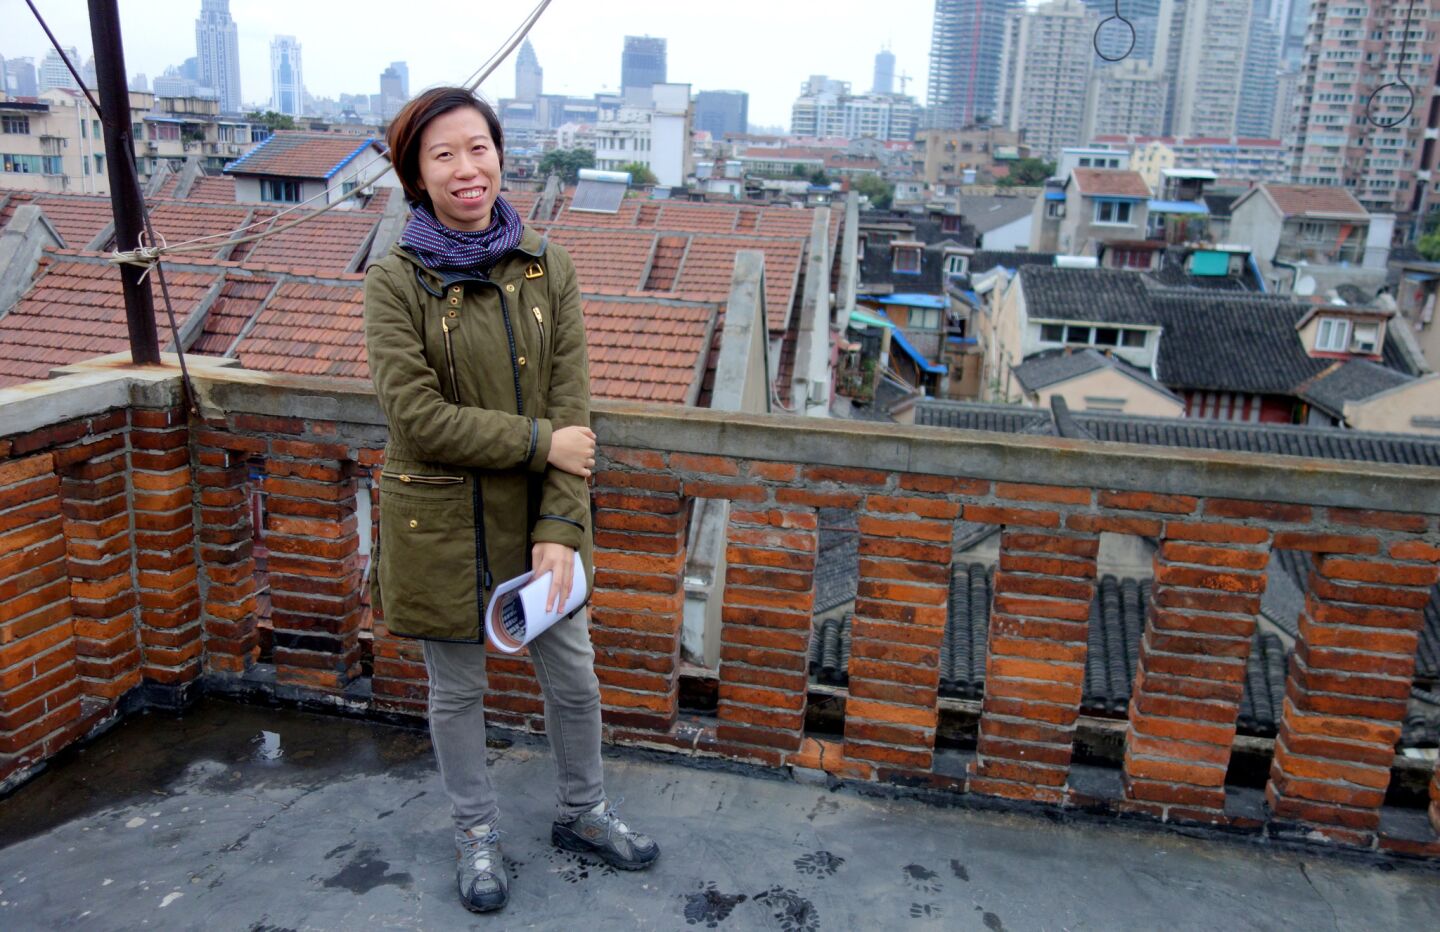 Janny Chyn, the owner of custom touring agency Shanghai Pathways, on a rooftop in the Old City of Shanghai.